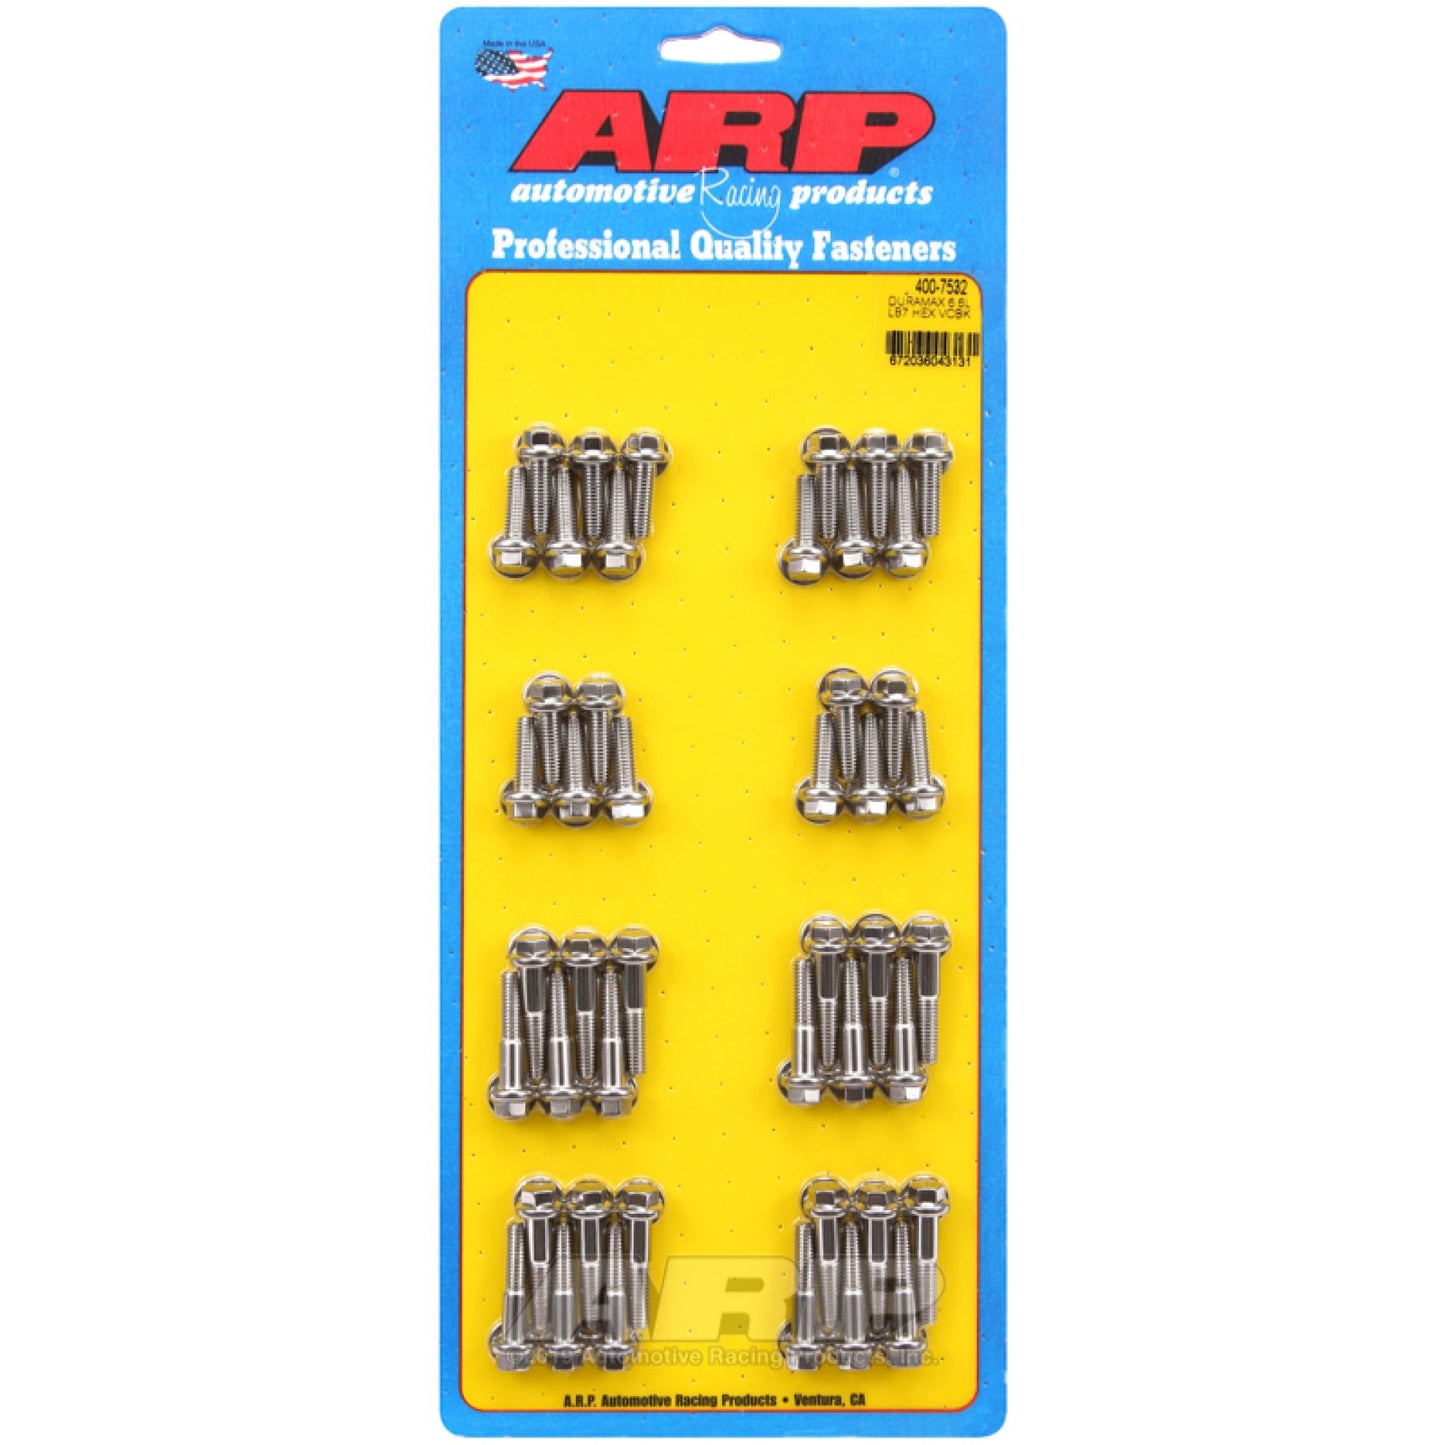 ARP Duramax 6.6L Lb7 Hex Valve Cover Bolt Kit - Polished Stainless Steel ARP Hardware Kits - Other